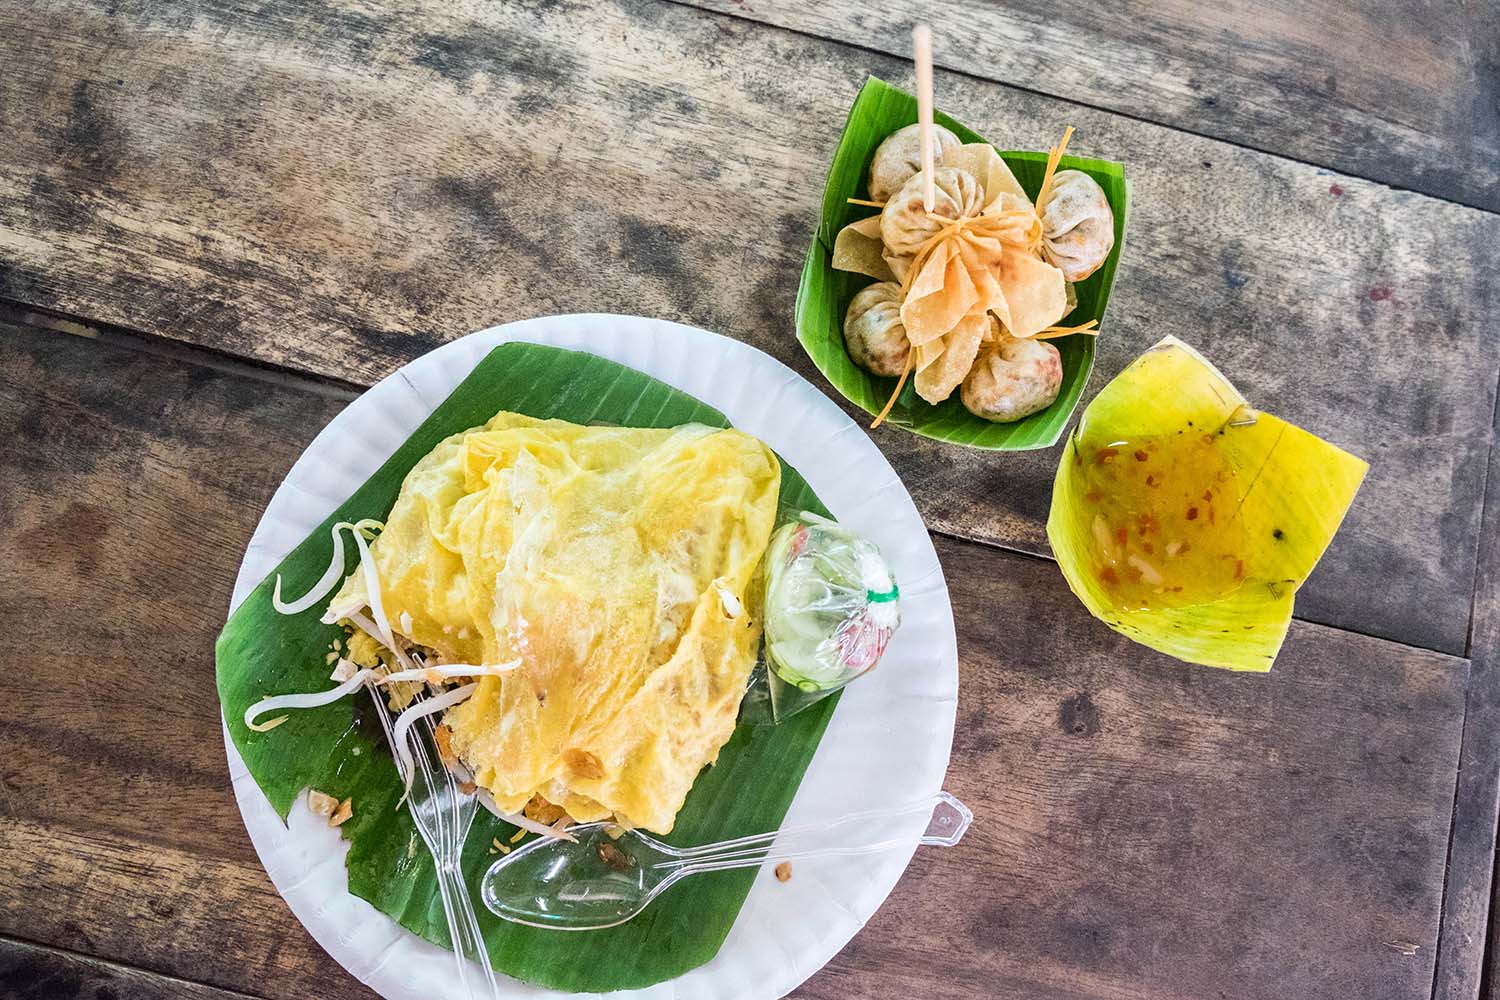 Thai breakfast with folded omelette and dumplings on a wooden table at a floating market in Bangkok